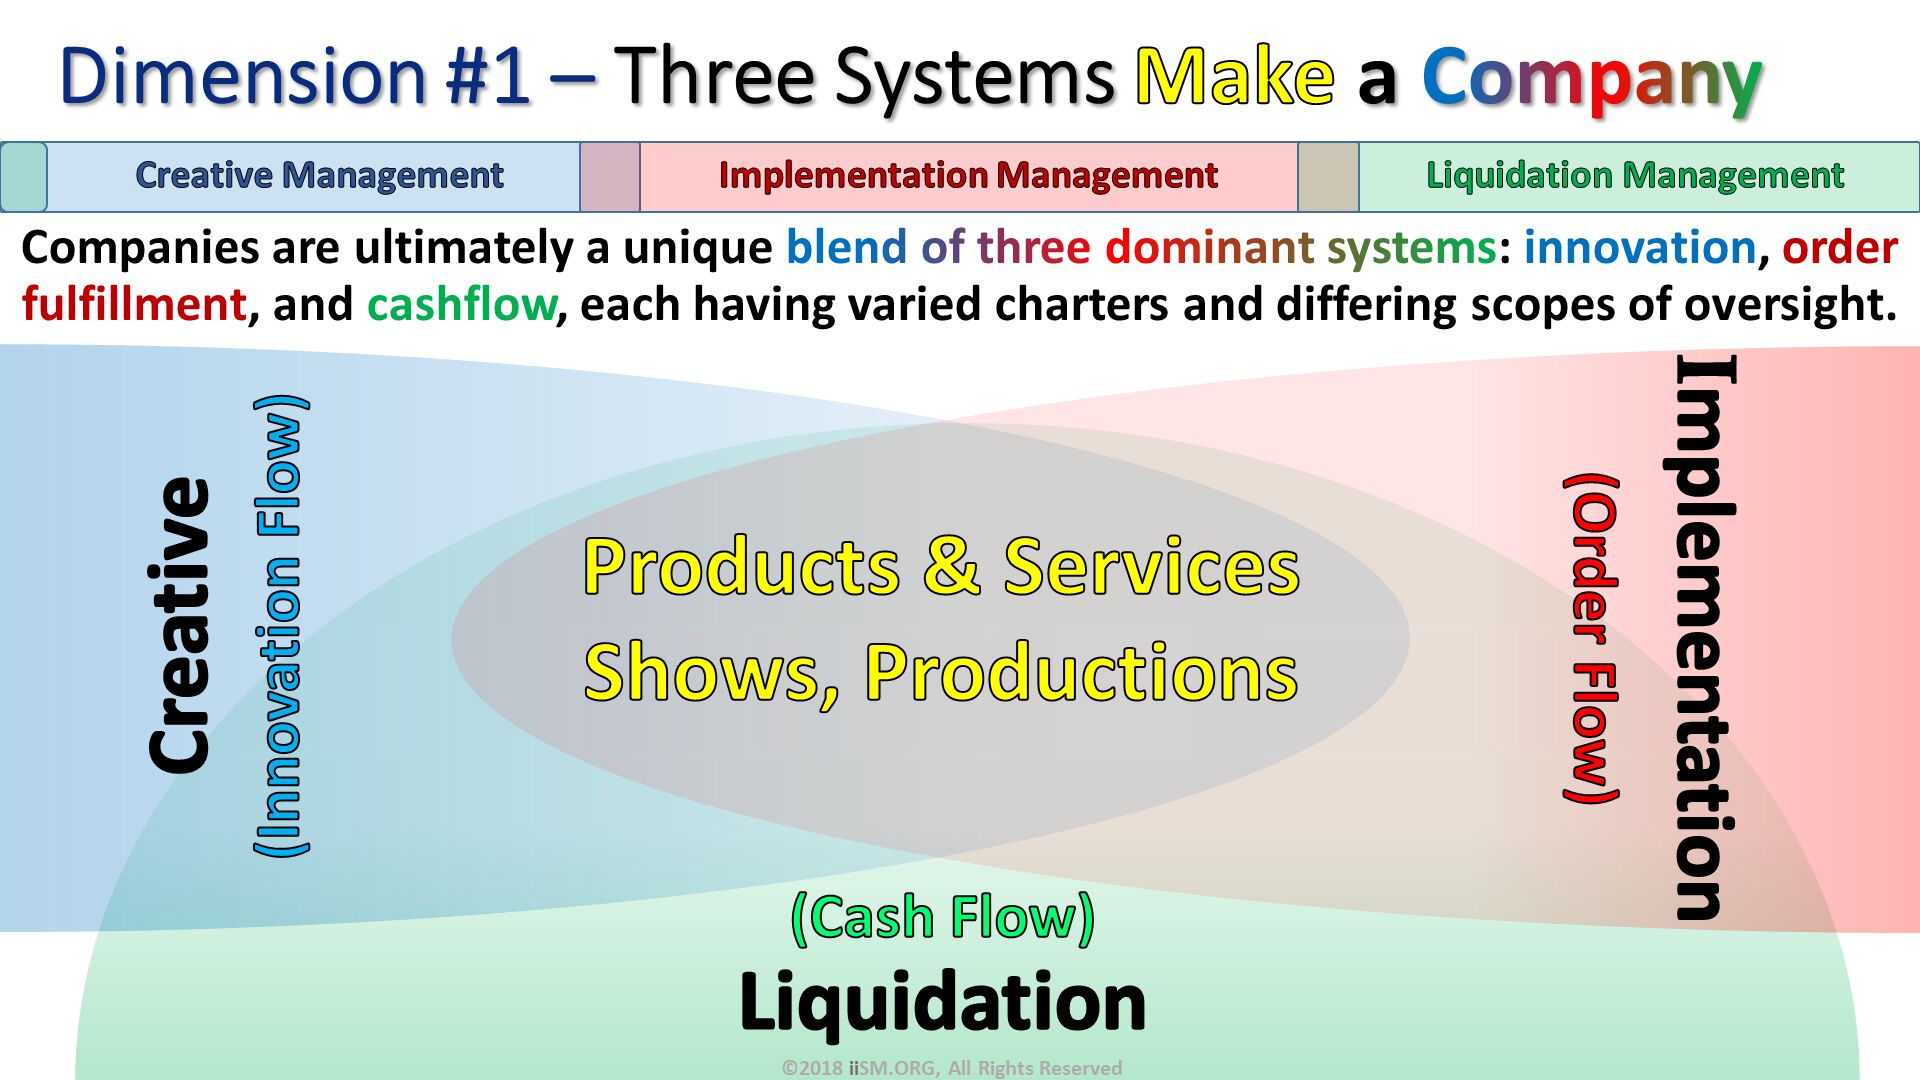 Dimension #1 – Three Systems Make a Company. Companies are ultimately a unique blend of three dominant systems: innovation, order fulfillment, and cashflow, each having varied charters and differing scopes of oversight. (Cash Flow)
Liquidation. Products & Services
Shows, Productions
 . Creative
(Innovation Flow). Implementation
(Order Flow). ©2018 iiSM.ORG, All Rights Reserved. 